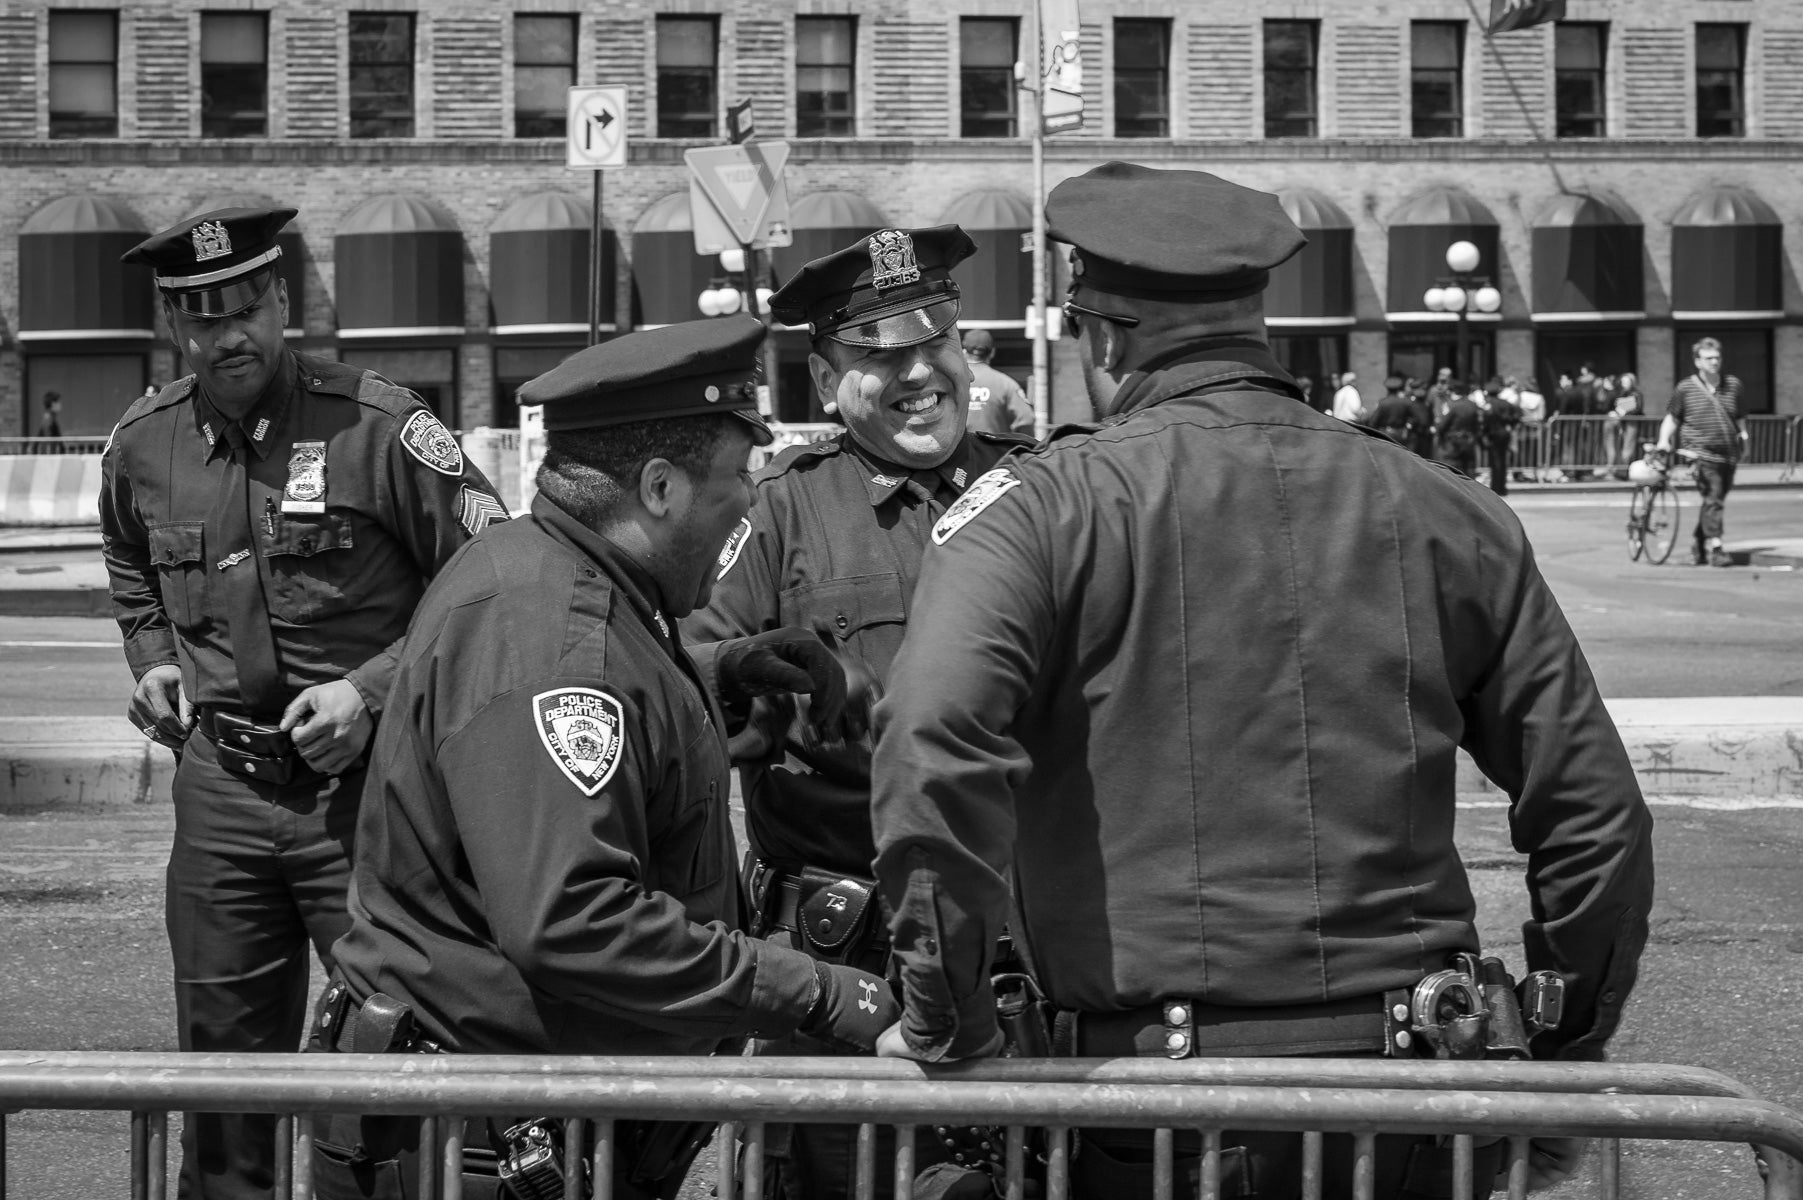 ic:A memo from the New York Police Department was issued as a firm reminder that police officers cannot arrest individuals for recording them. In New York City, it is entirely lawful to photograph or video record anything in public view, including federal structures and police officers, provided such activities do not interfere with ongoing law enforcement actions. Therefore, it is legally permissible for individuals to document their encounters with police officers. Any deliberate attempt to hinder this process, such as obstructing the camera view or commanding the person to stop recording, amounts to censorship and infringes upon the individual's First Amendment rights.